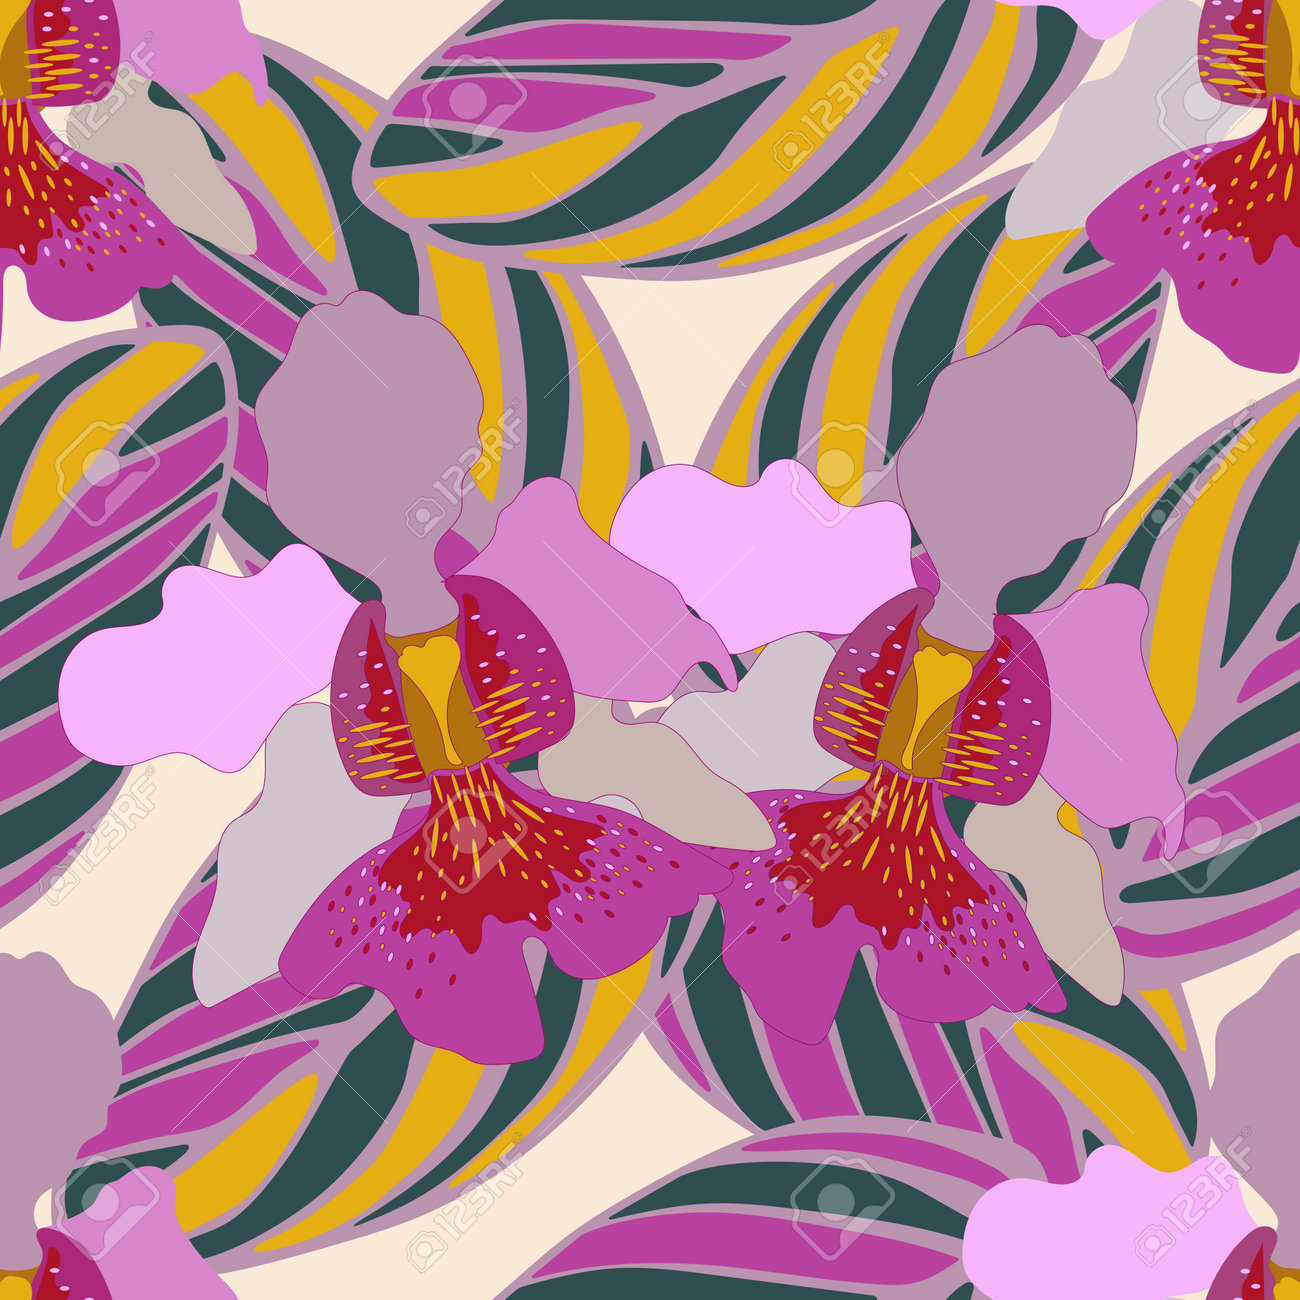 Seamless pattern of striped colored leaves and orchids vanda miss joaquim template for printing on textiles fabric bedding wrapping paper covers wallpaper coloring pages vector illustration royalty free svg cliparts vectors and